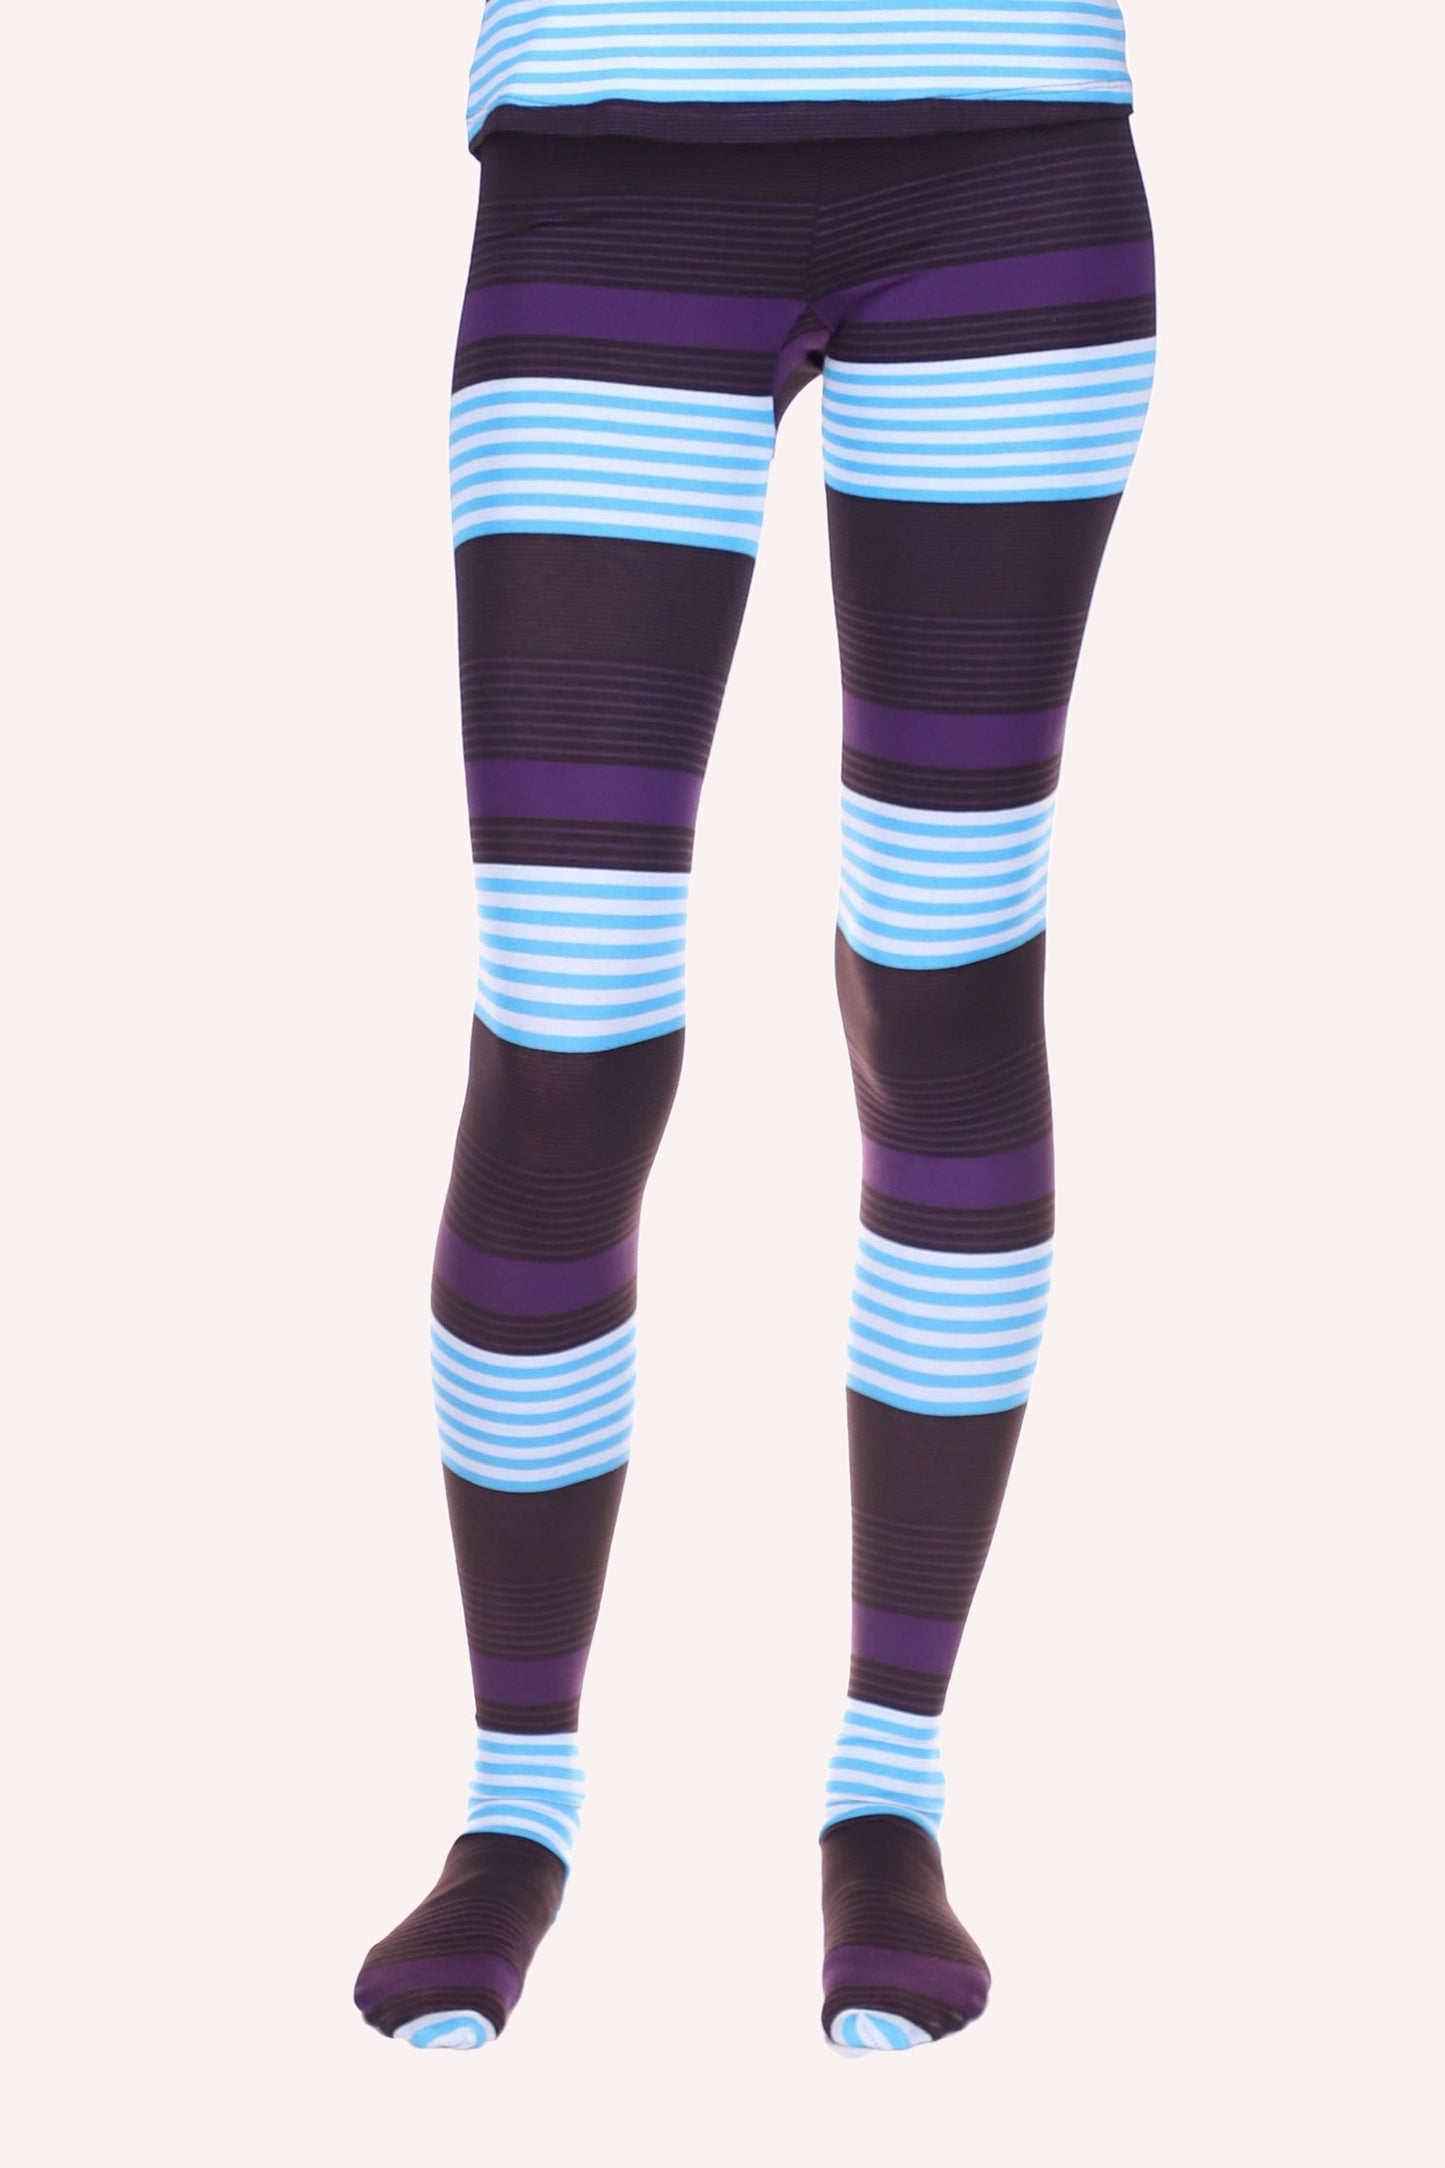 Tights , Design different sizes of bands in Orchid, blue, & purple around the legs